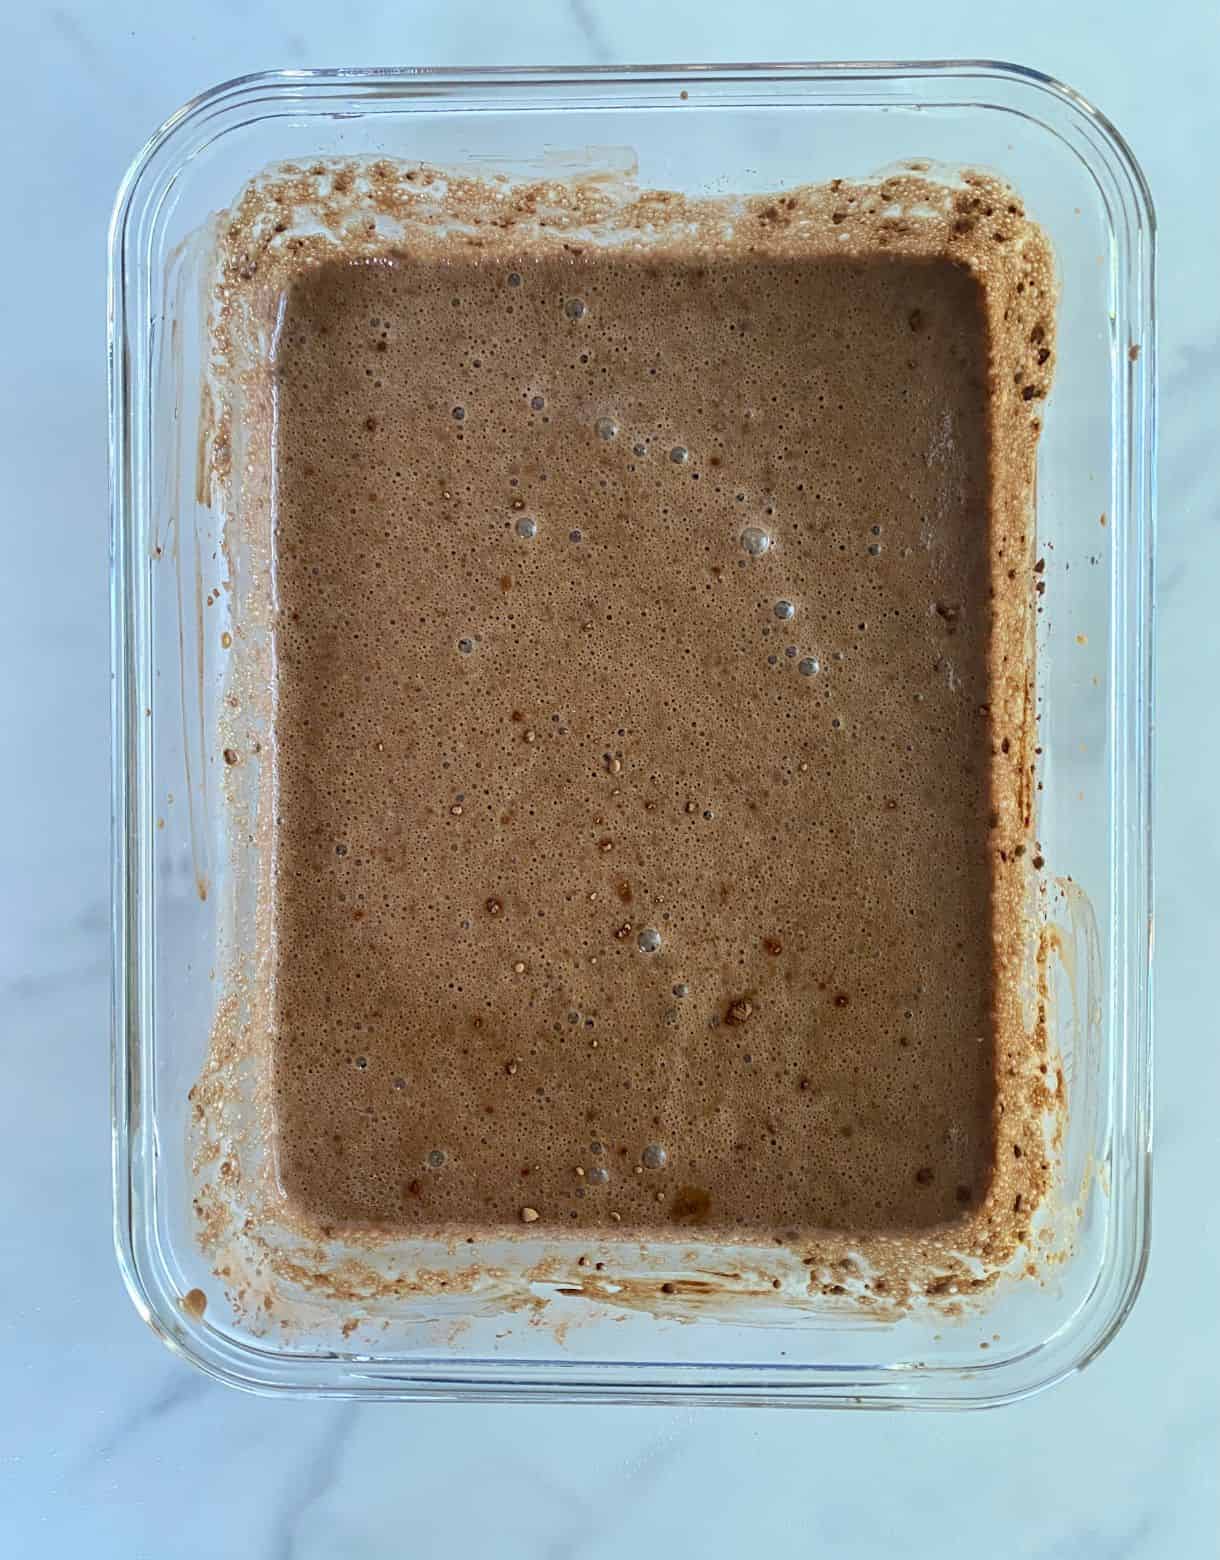 A dish with mixed Chocolate Peanut Butter Chia Pudding ready to refrigerate.